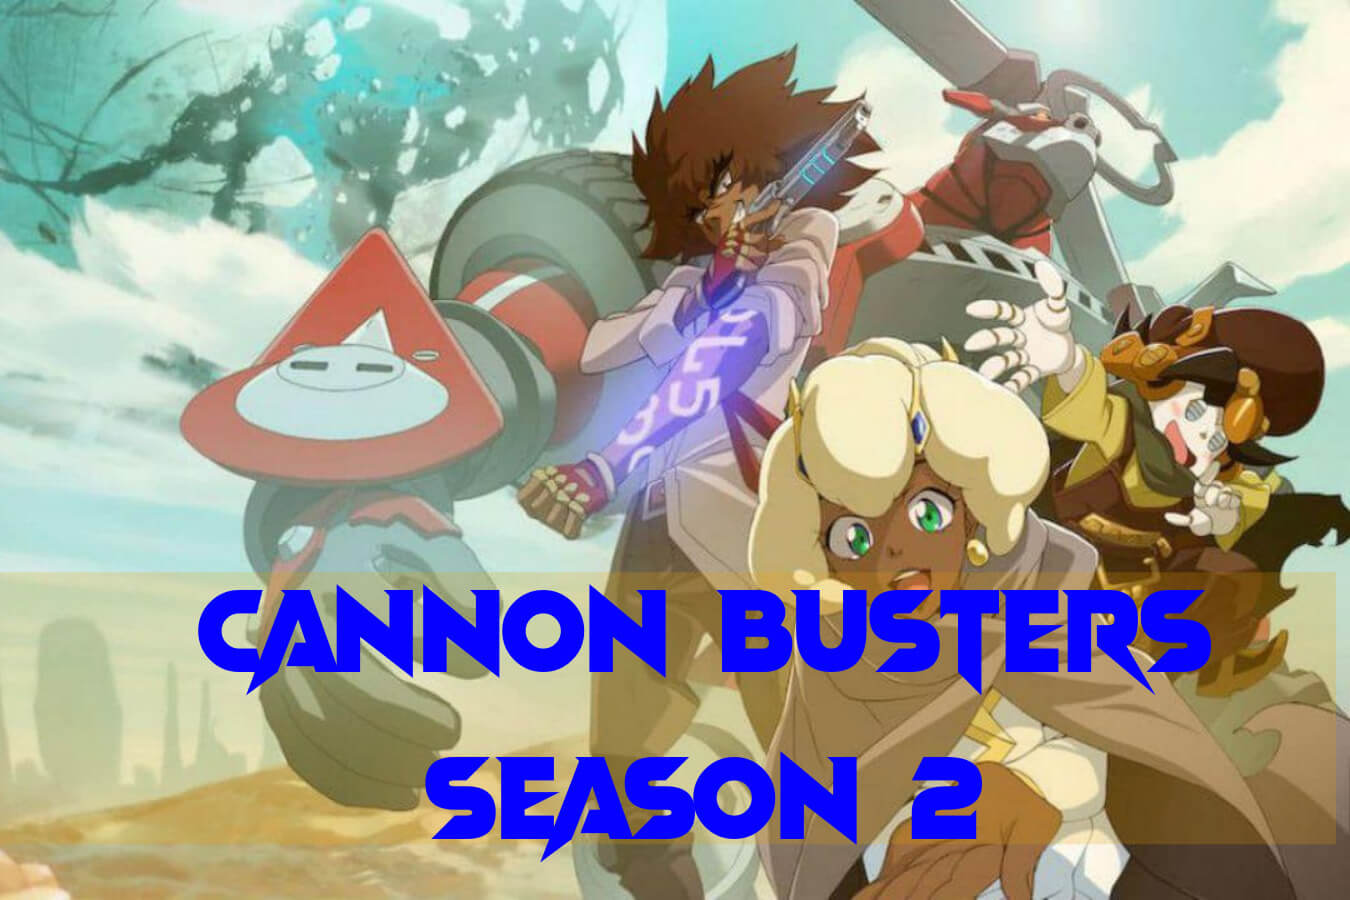 How many seasons in the Cannon Busters?